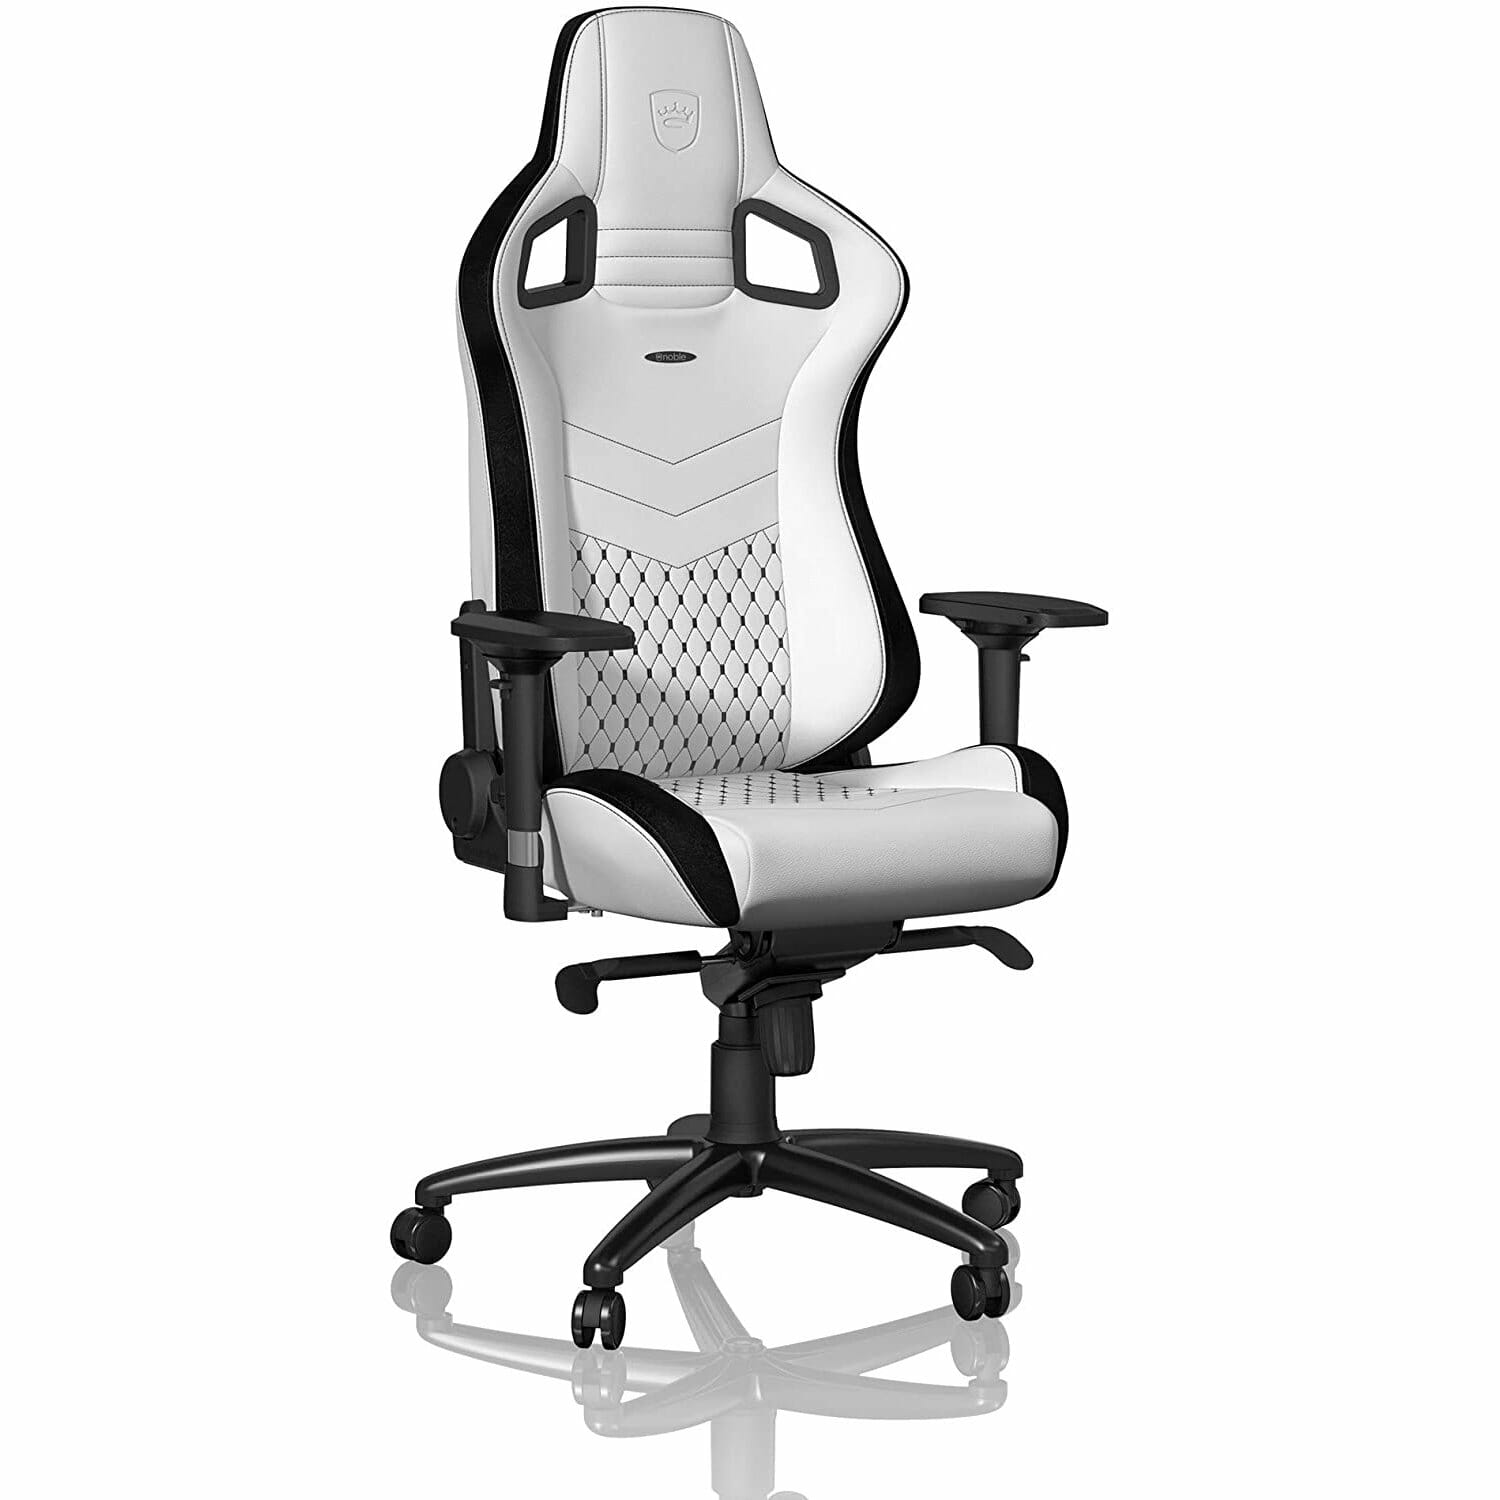 Best White Gaming Chair Overall